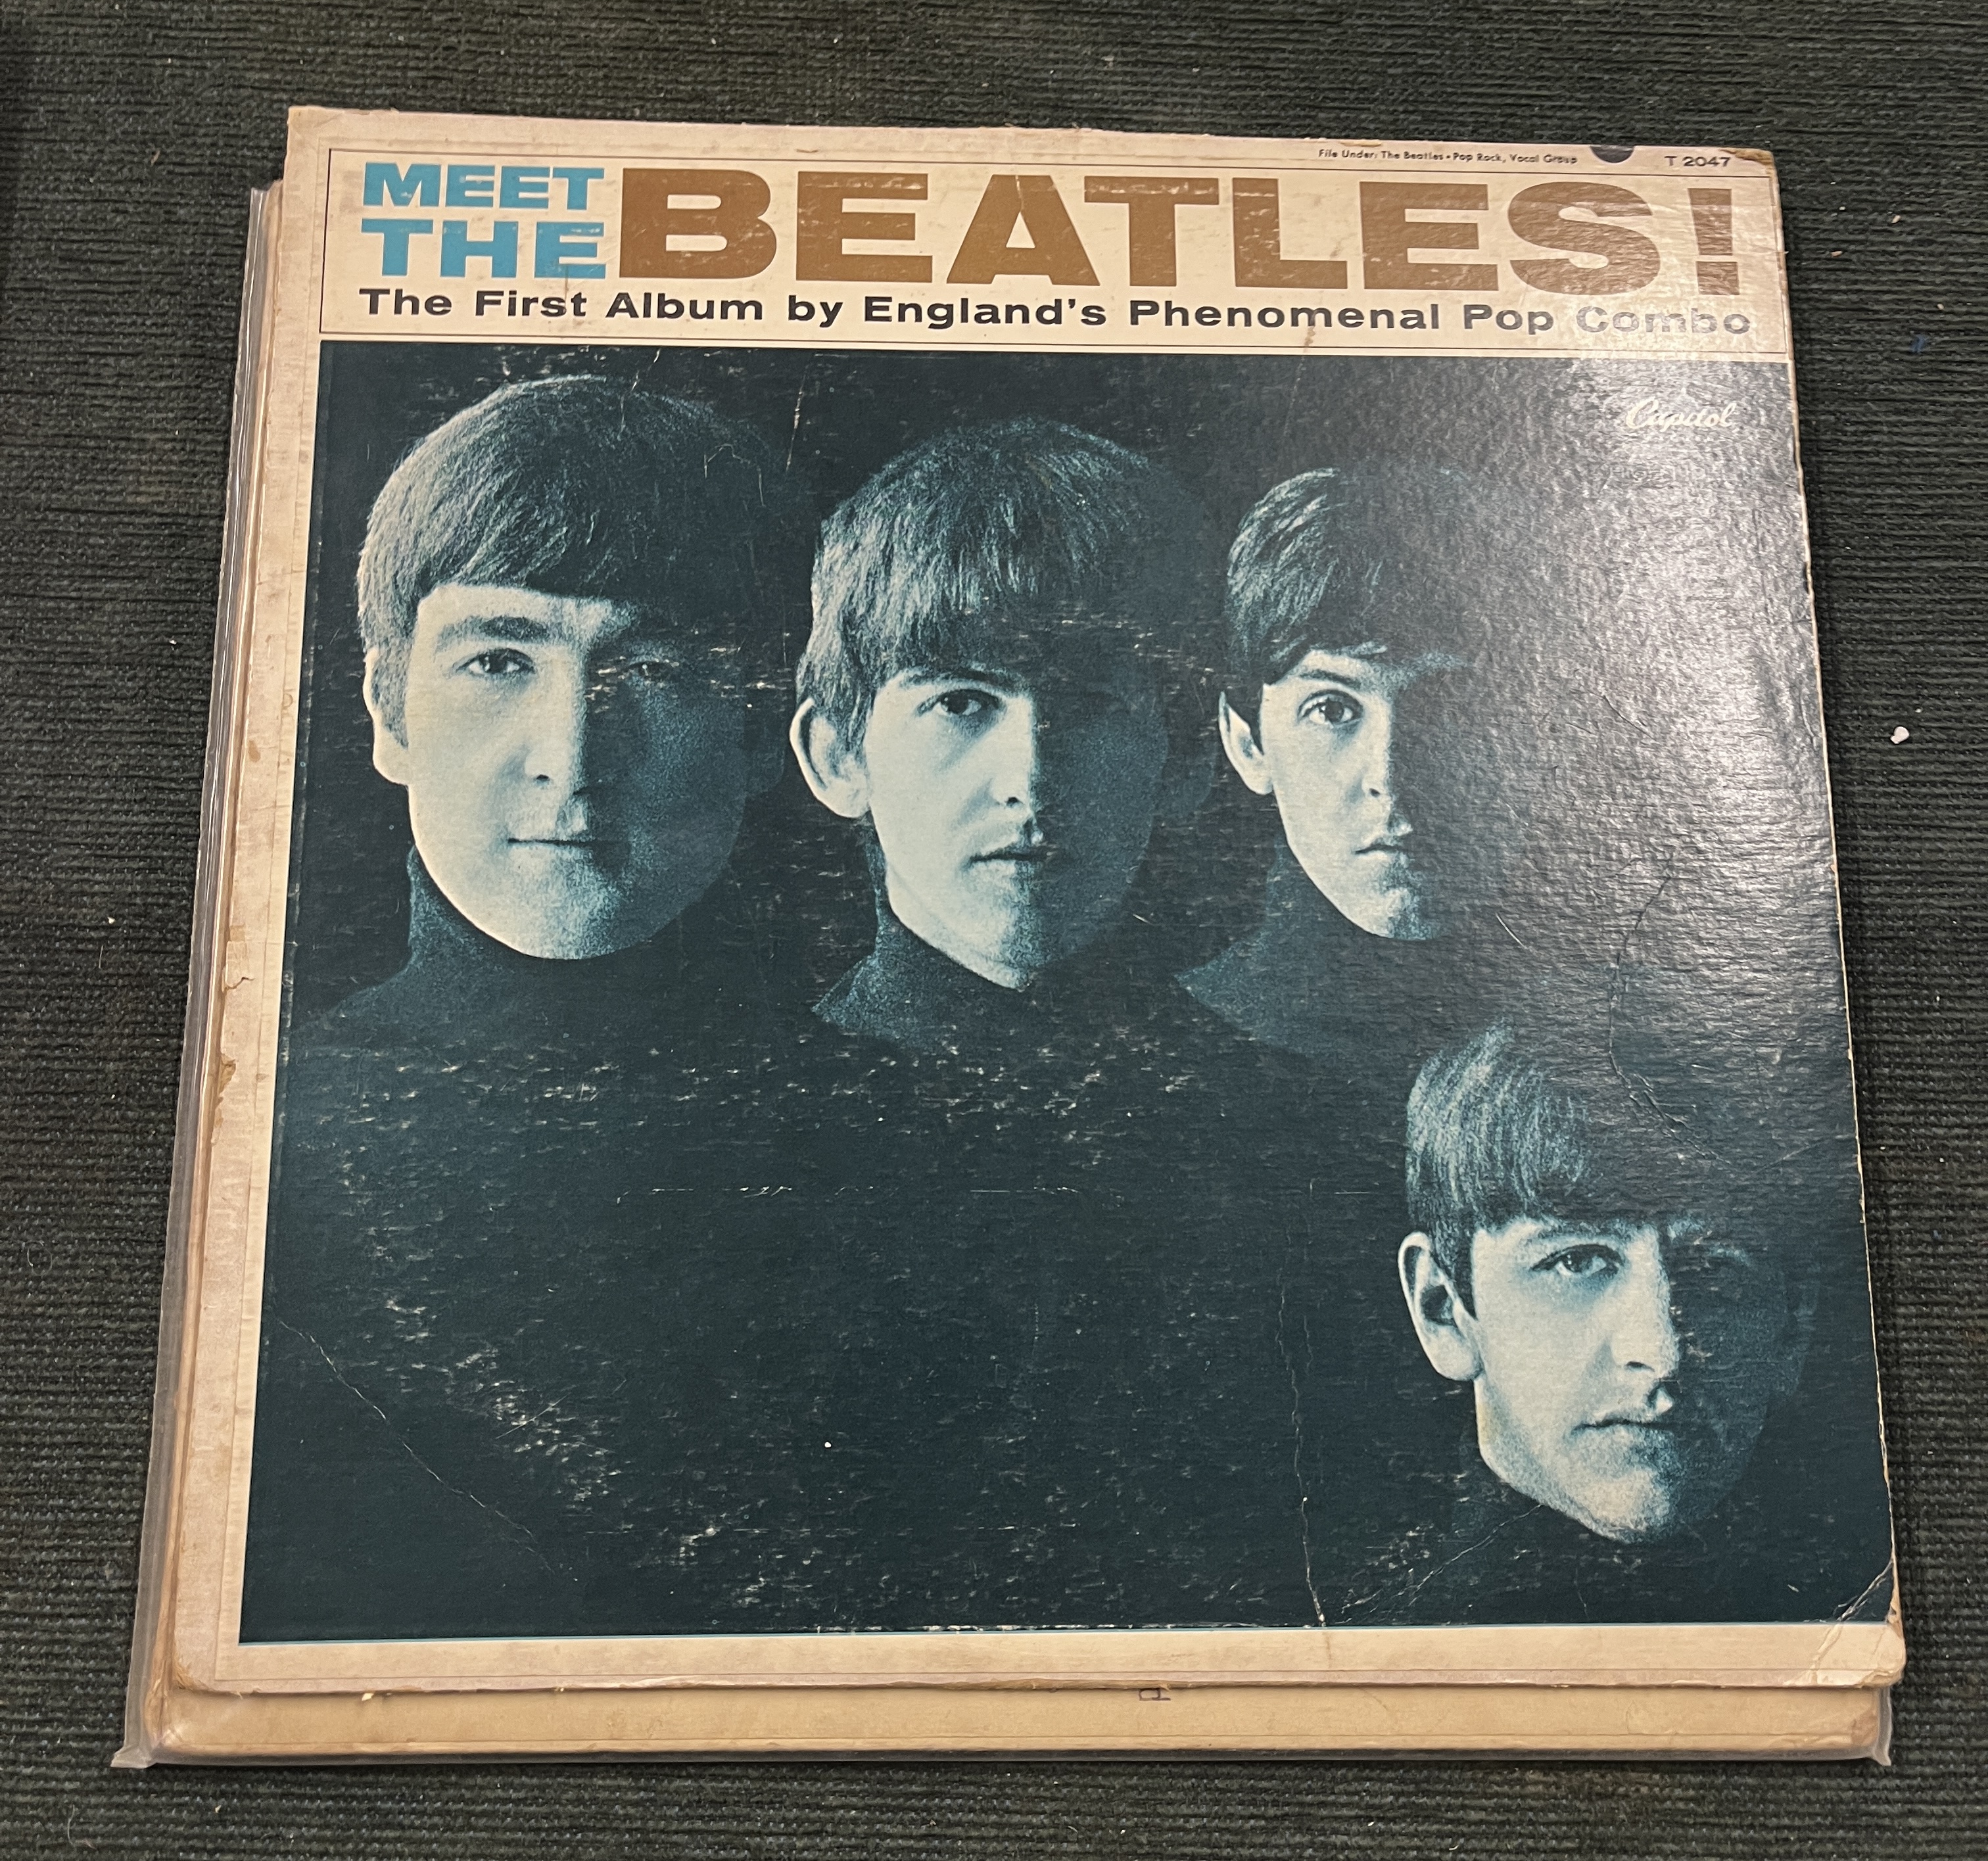 Collection of Lps - US press Beatles - Image 5 of 6